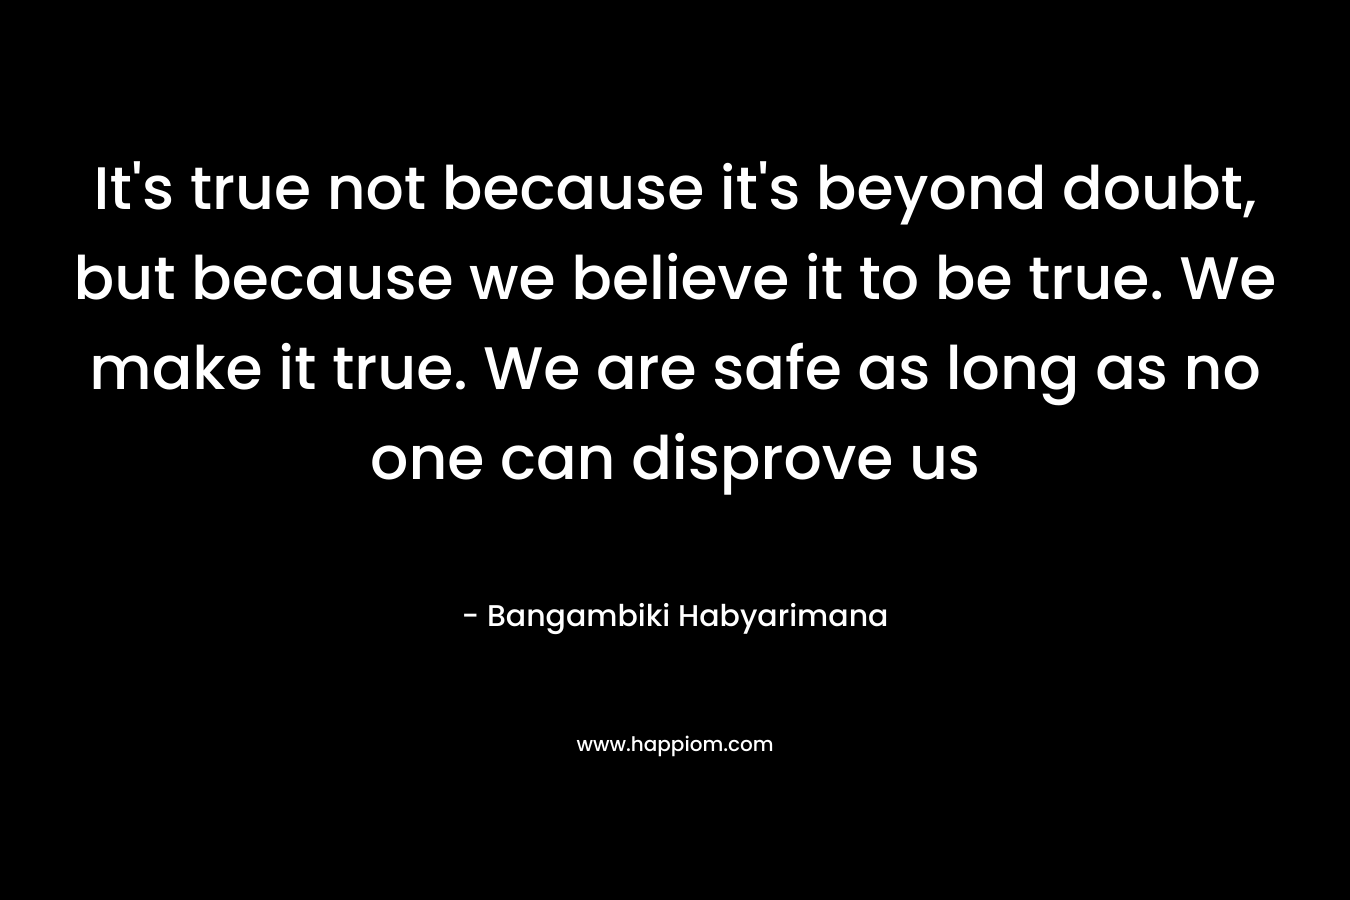 It's true not because it's beyond doubt, but because we believe it to be true. We make it true. We are safe as long as no one can disprove us